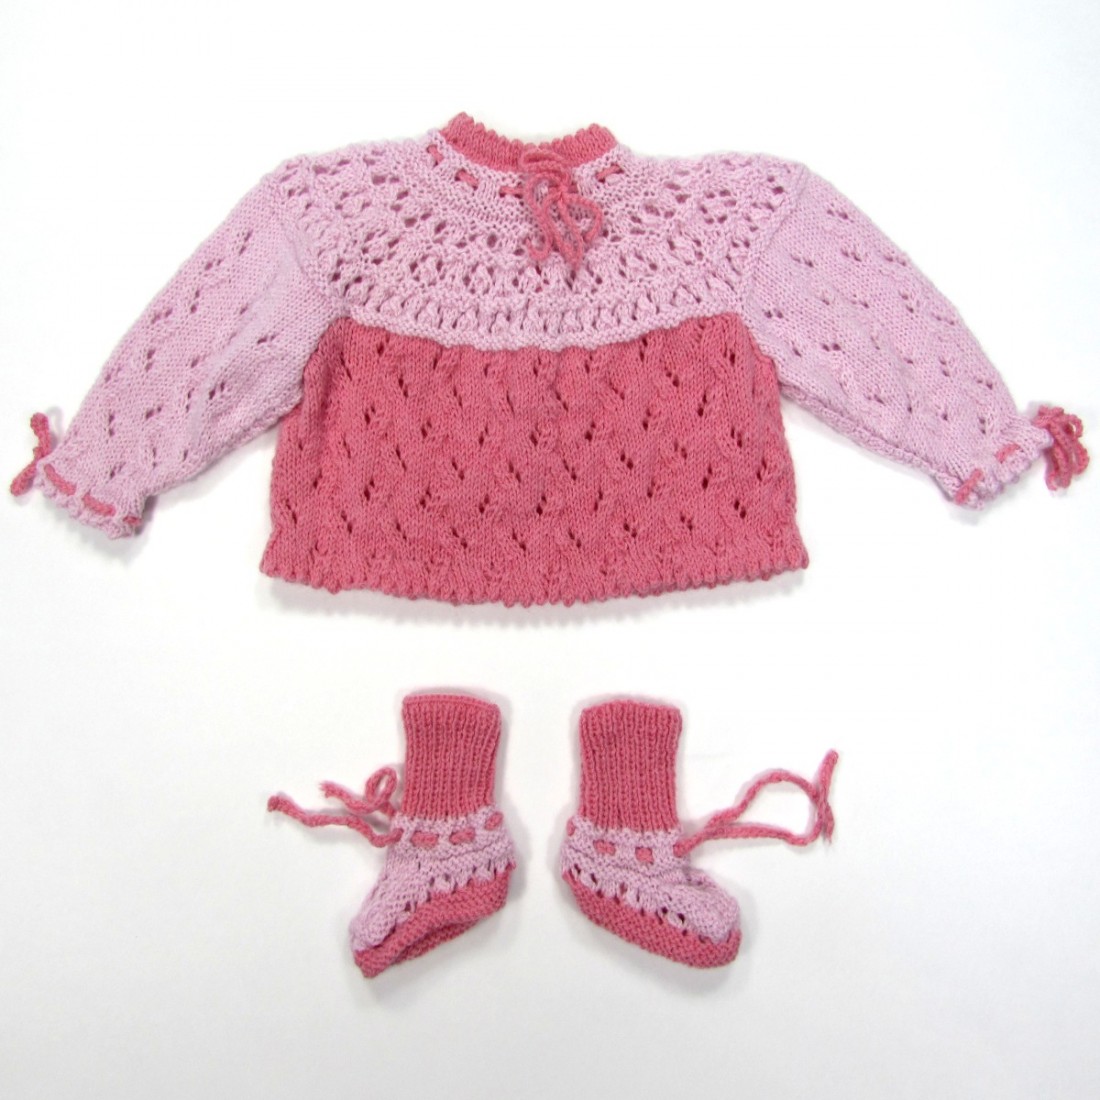 Brassiere Bebe Fille Et Chaussons Au Tricot Rose Gourmand 3 Mois